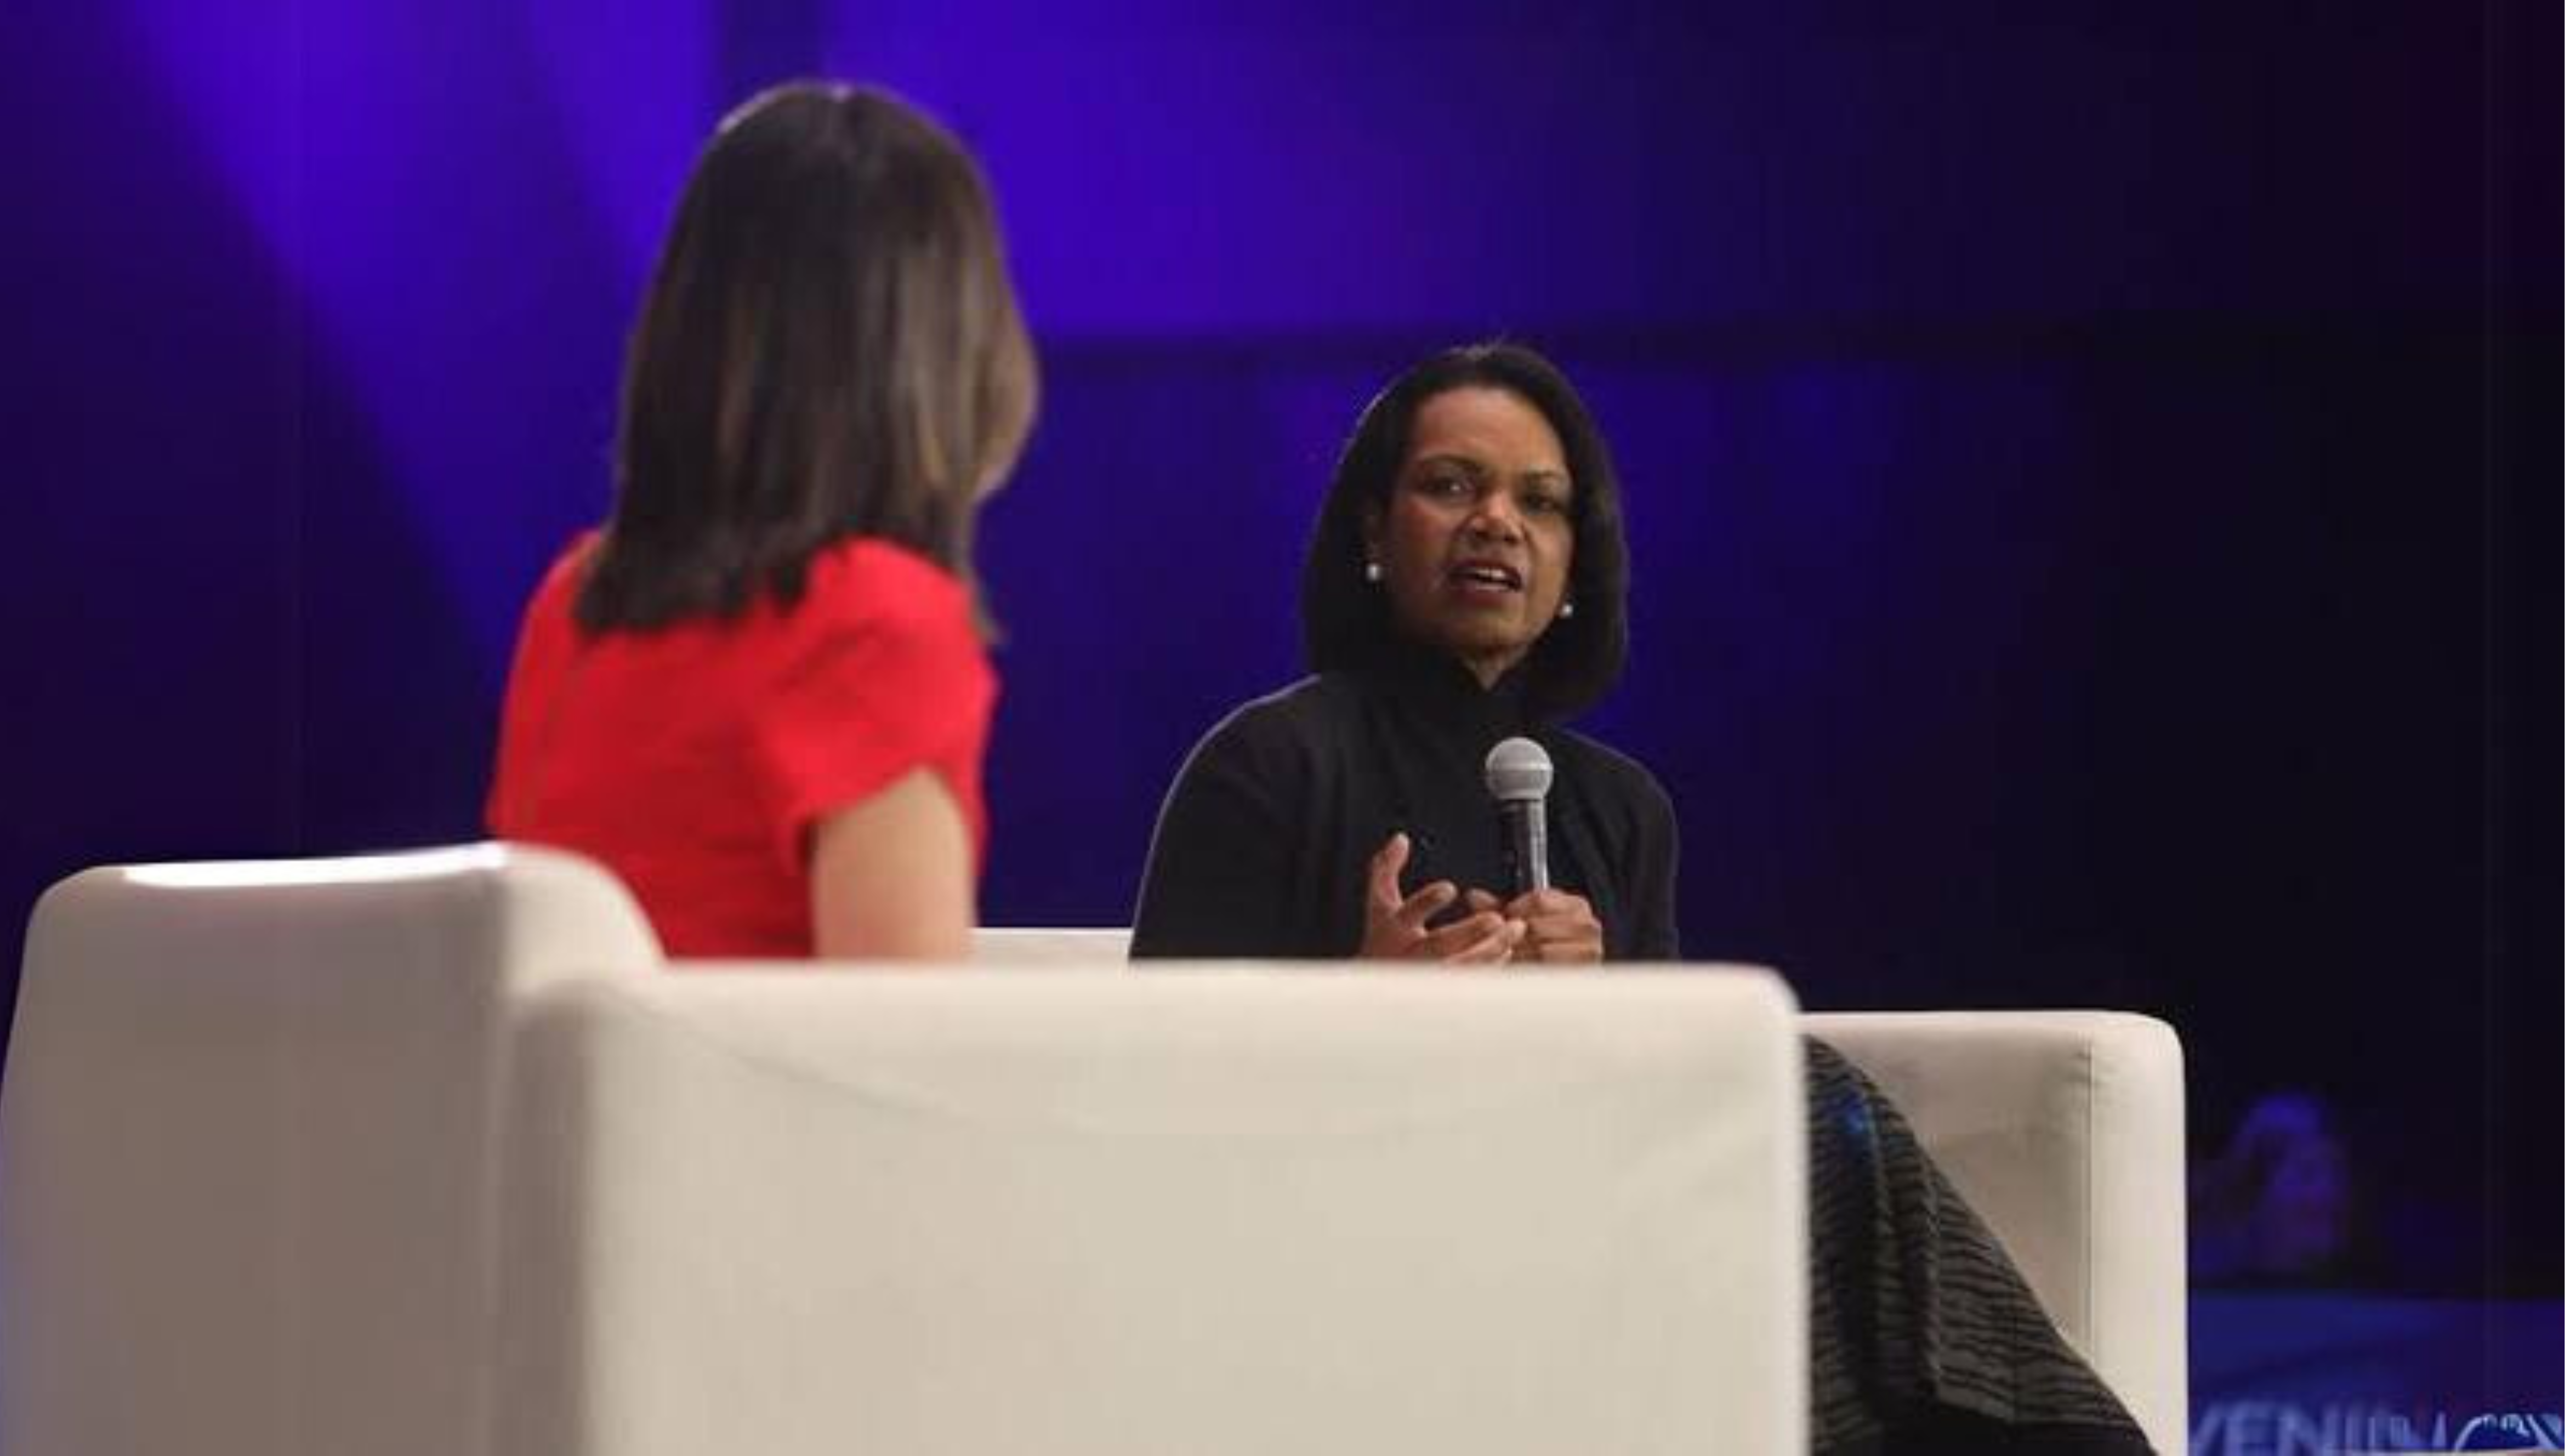 Holly Ransom interviewing Condoleezza Rice on stage